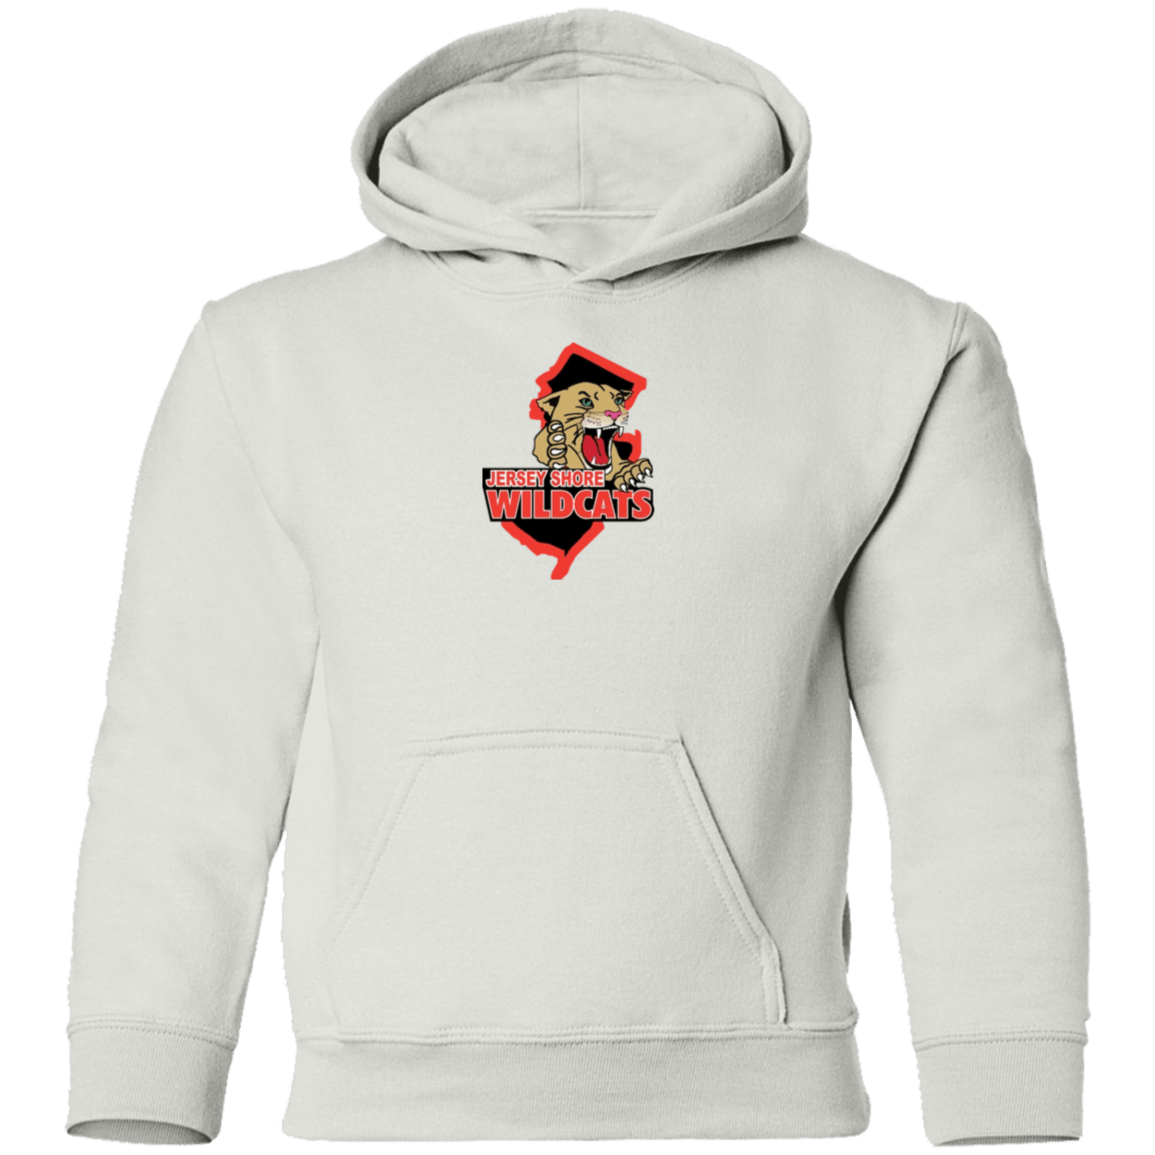 Wildcats Youth Pullover Hoodie